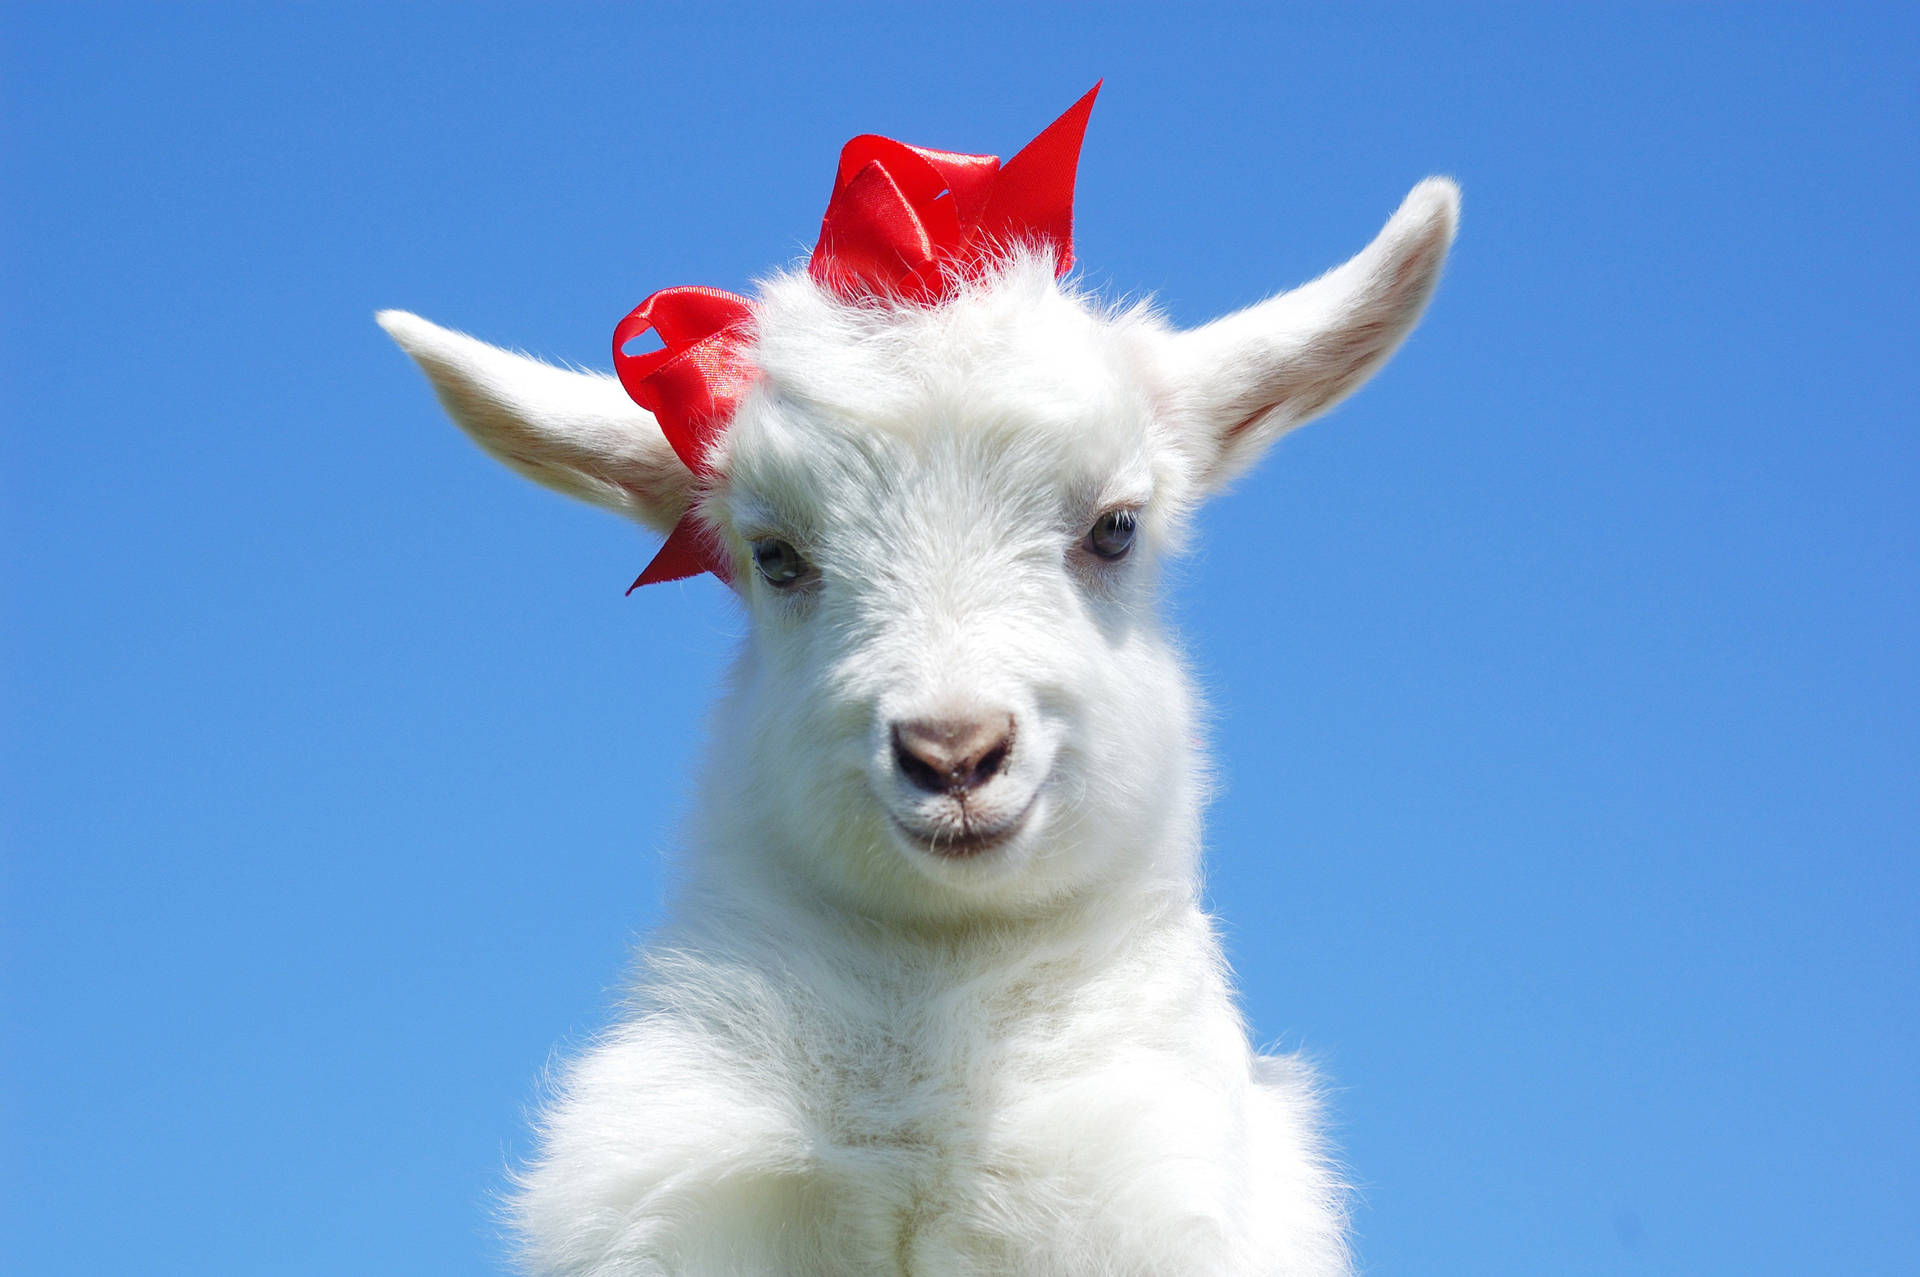 Adorable White Baby Goat Decorated with Red Ribbons Wallpaper